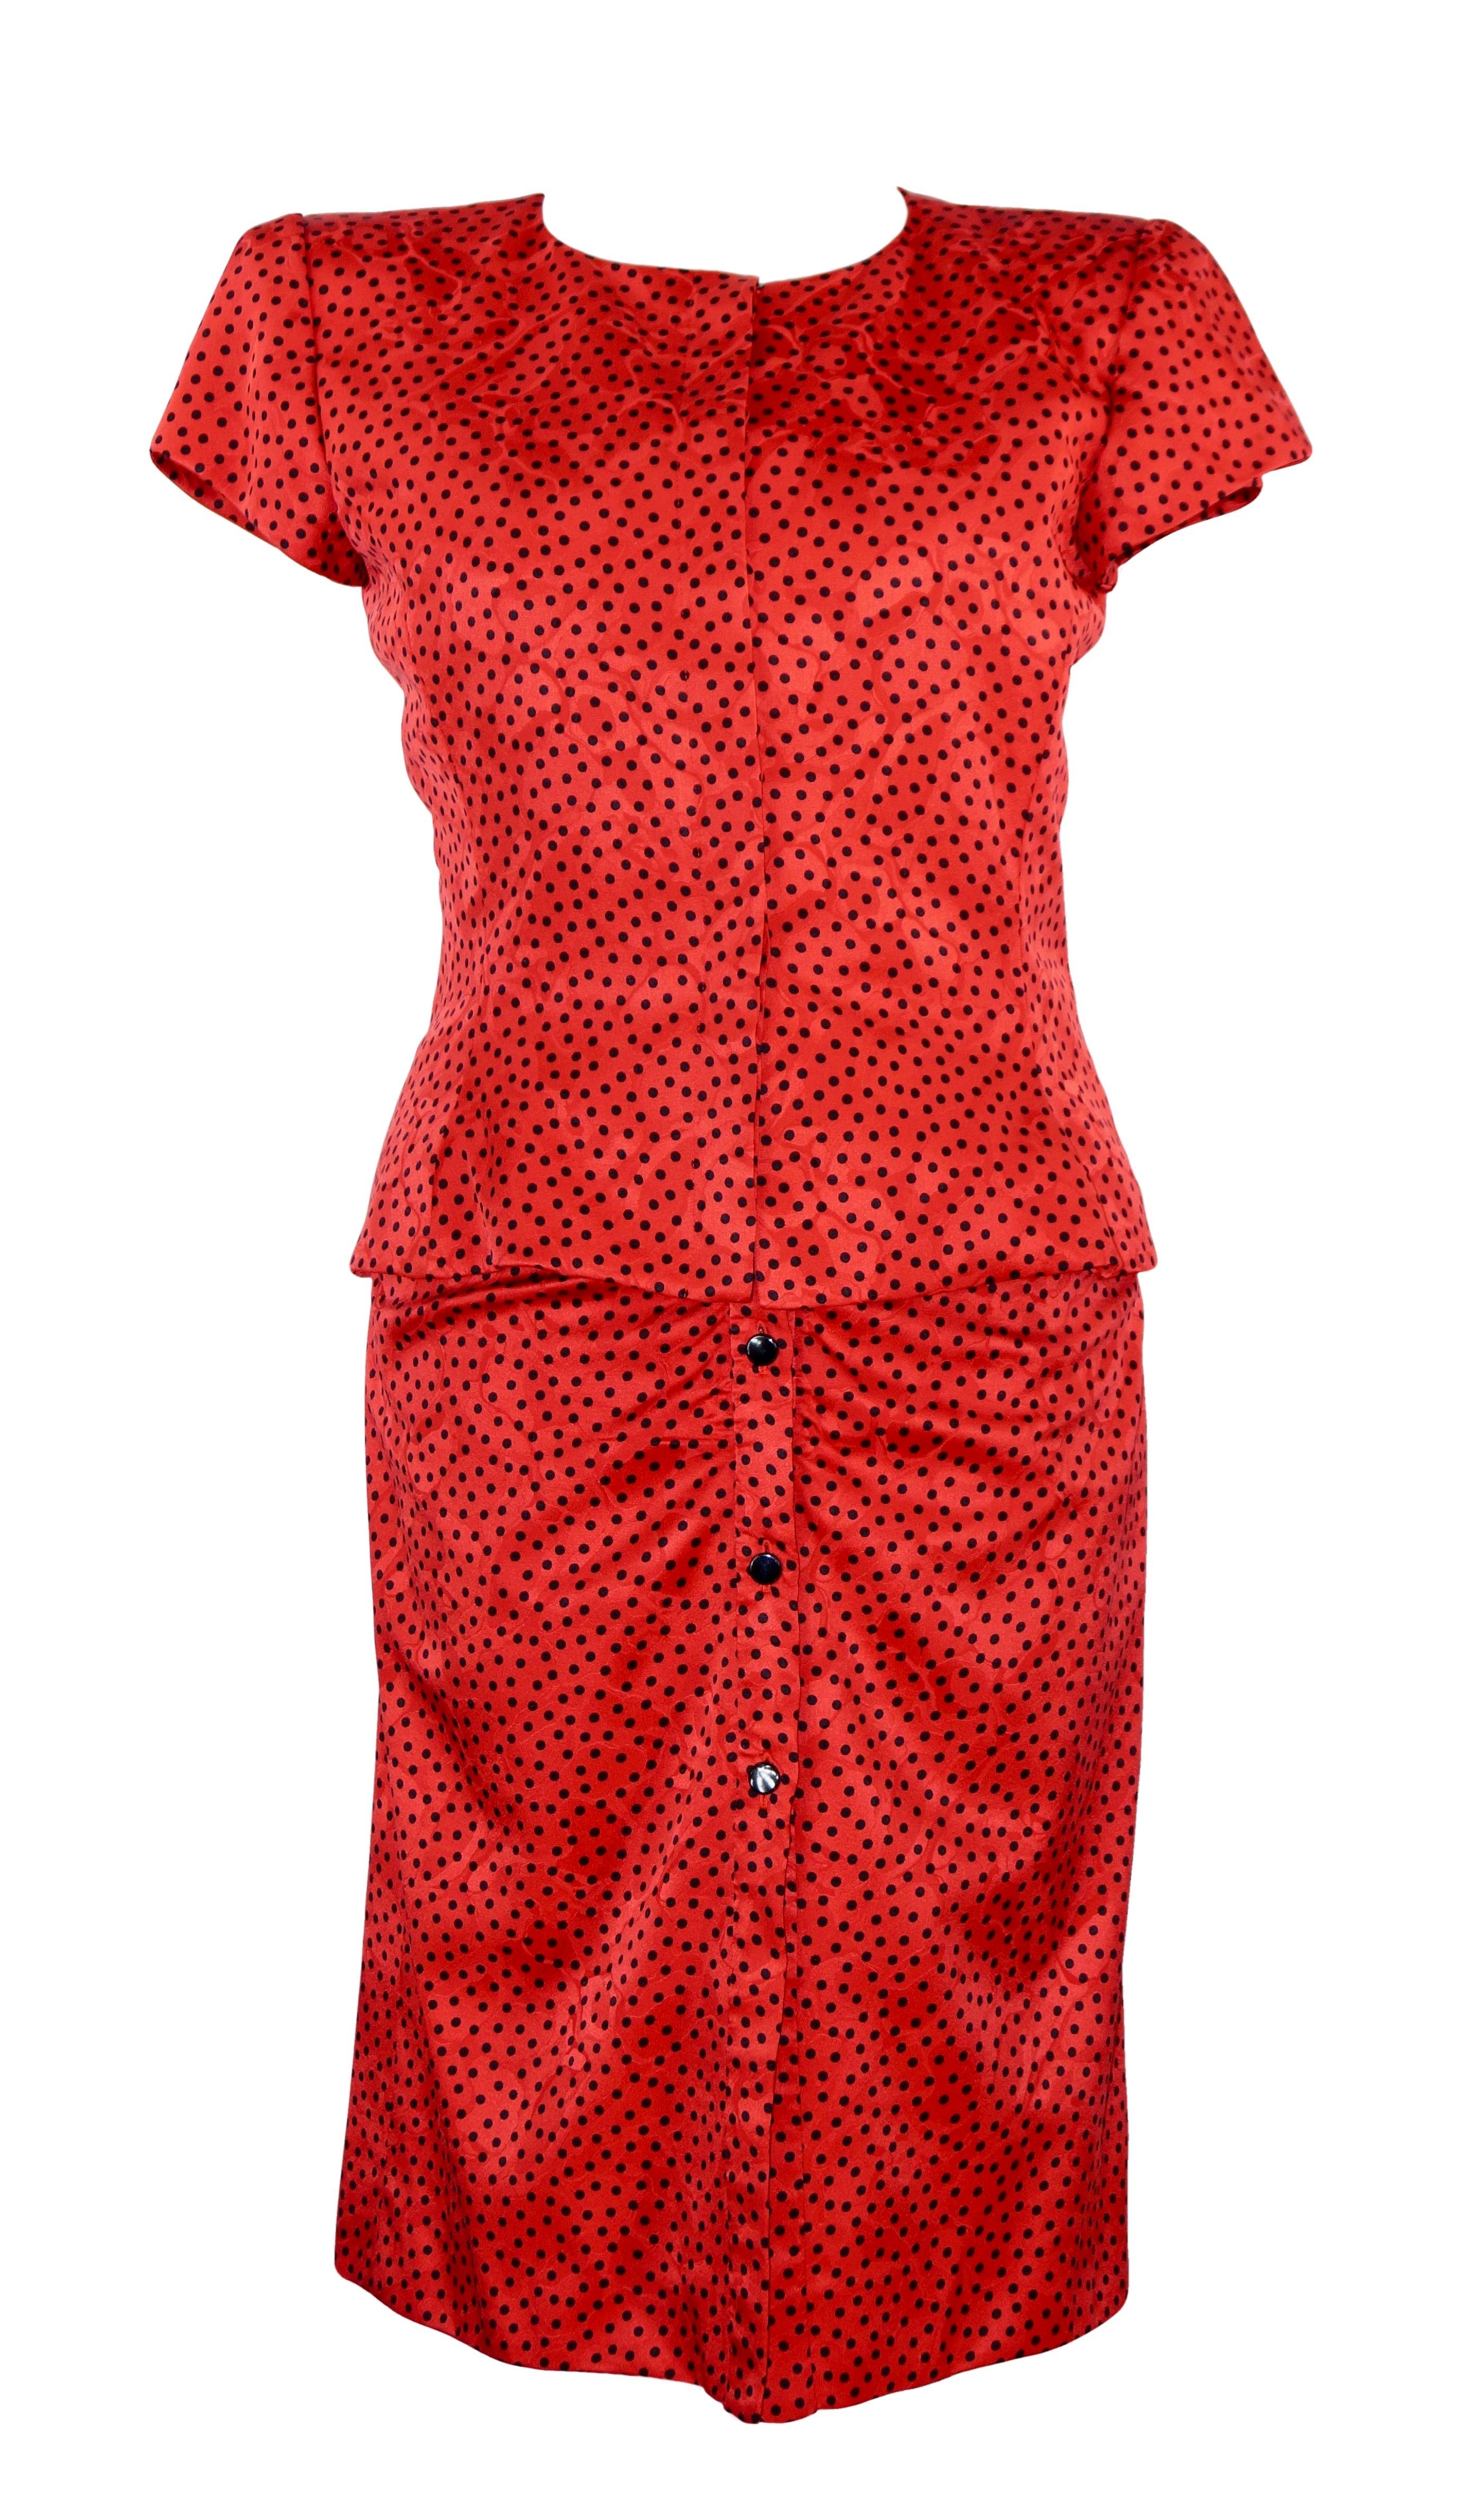 Valentino Boutique vintage 80s
Damask red silk with black polka dots dress suit
100% silk
Size 12US
Made in Italy
The dress has a bodice with splints inside
The jacket has padded shoulders
Flat measures
Dress:
Length cm. 108 with straps
Length cm. 